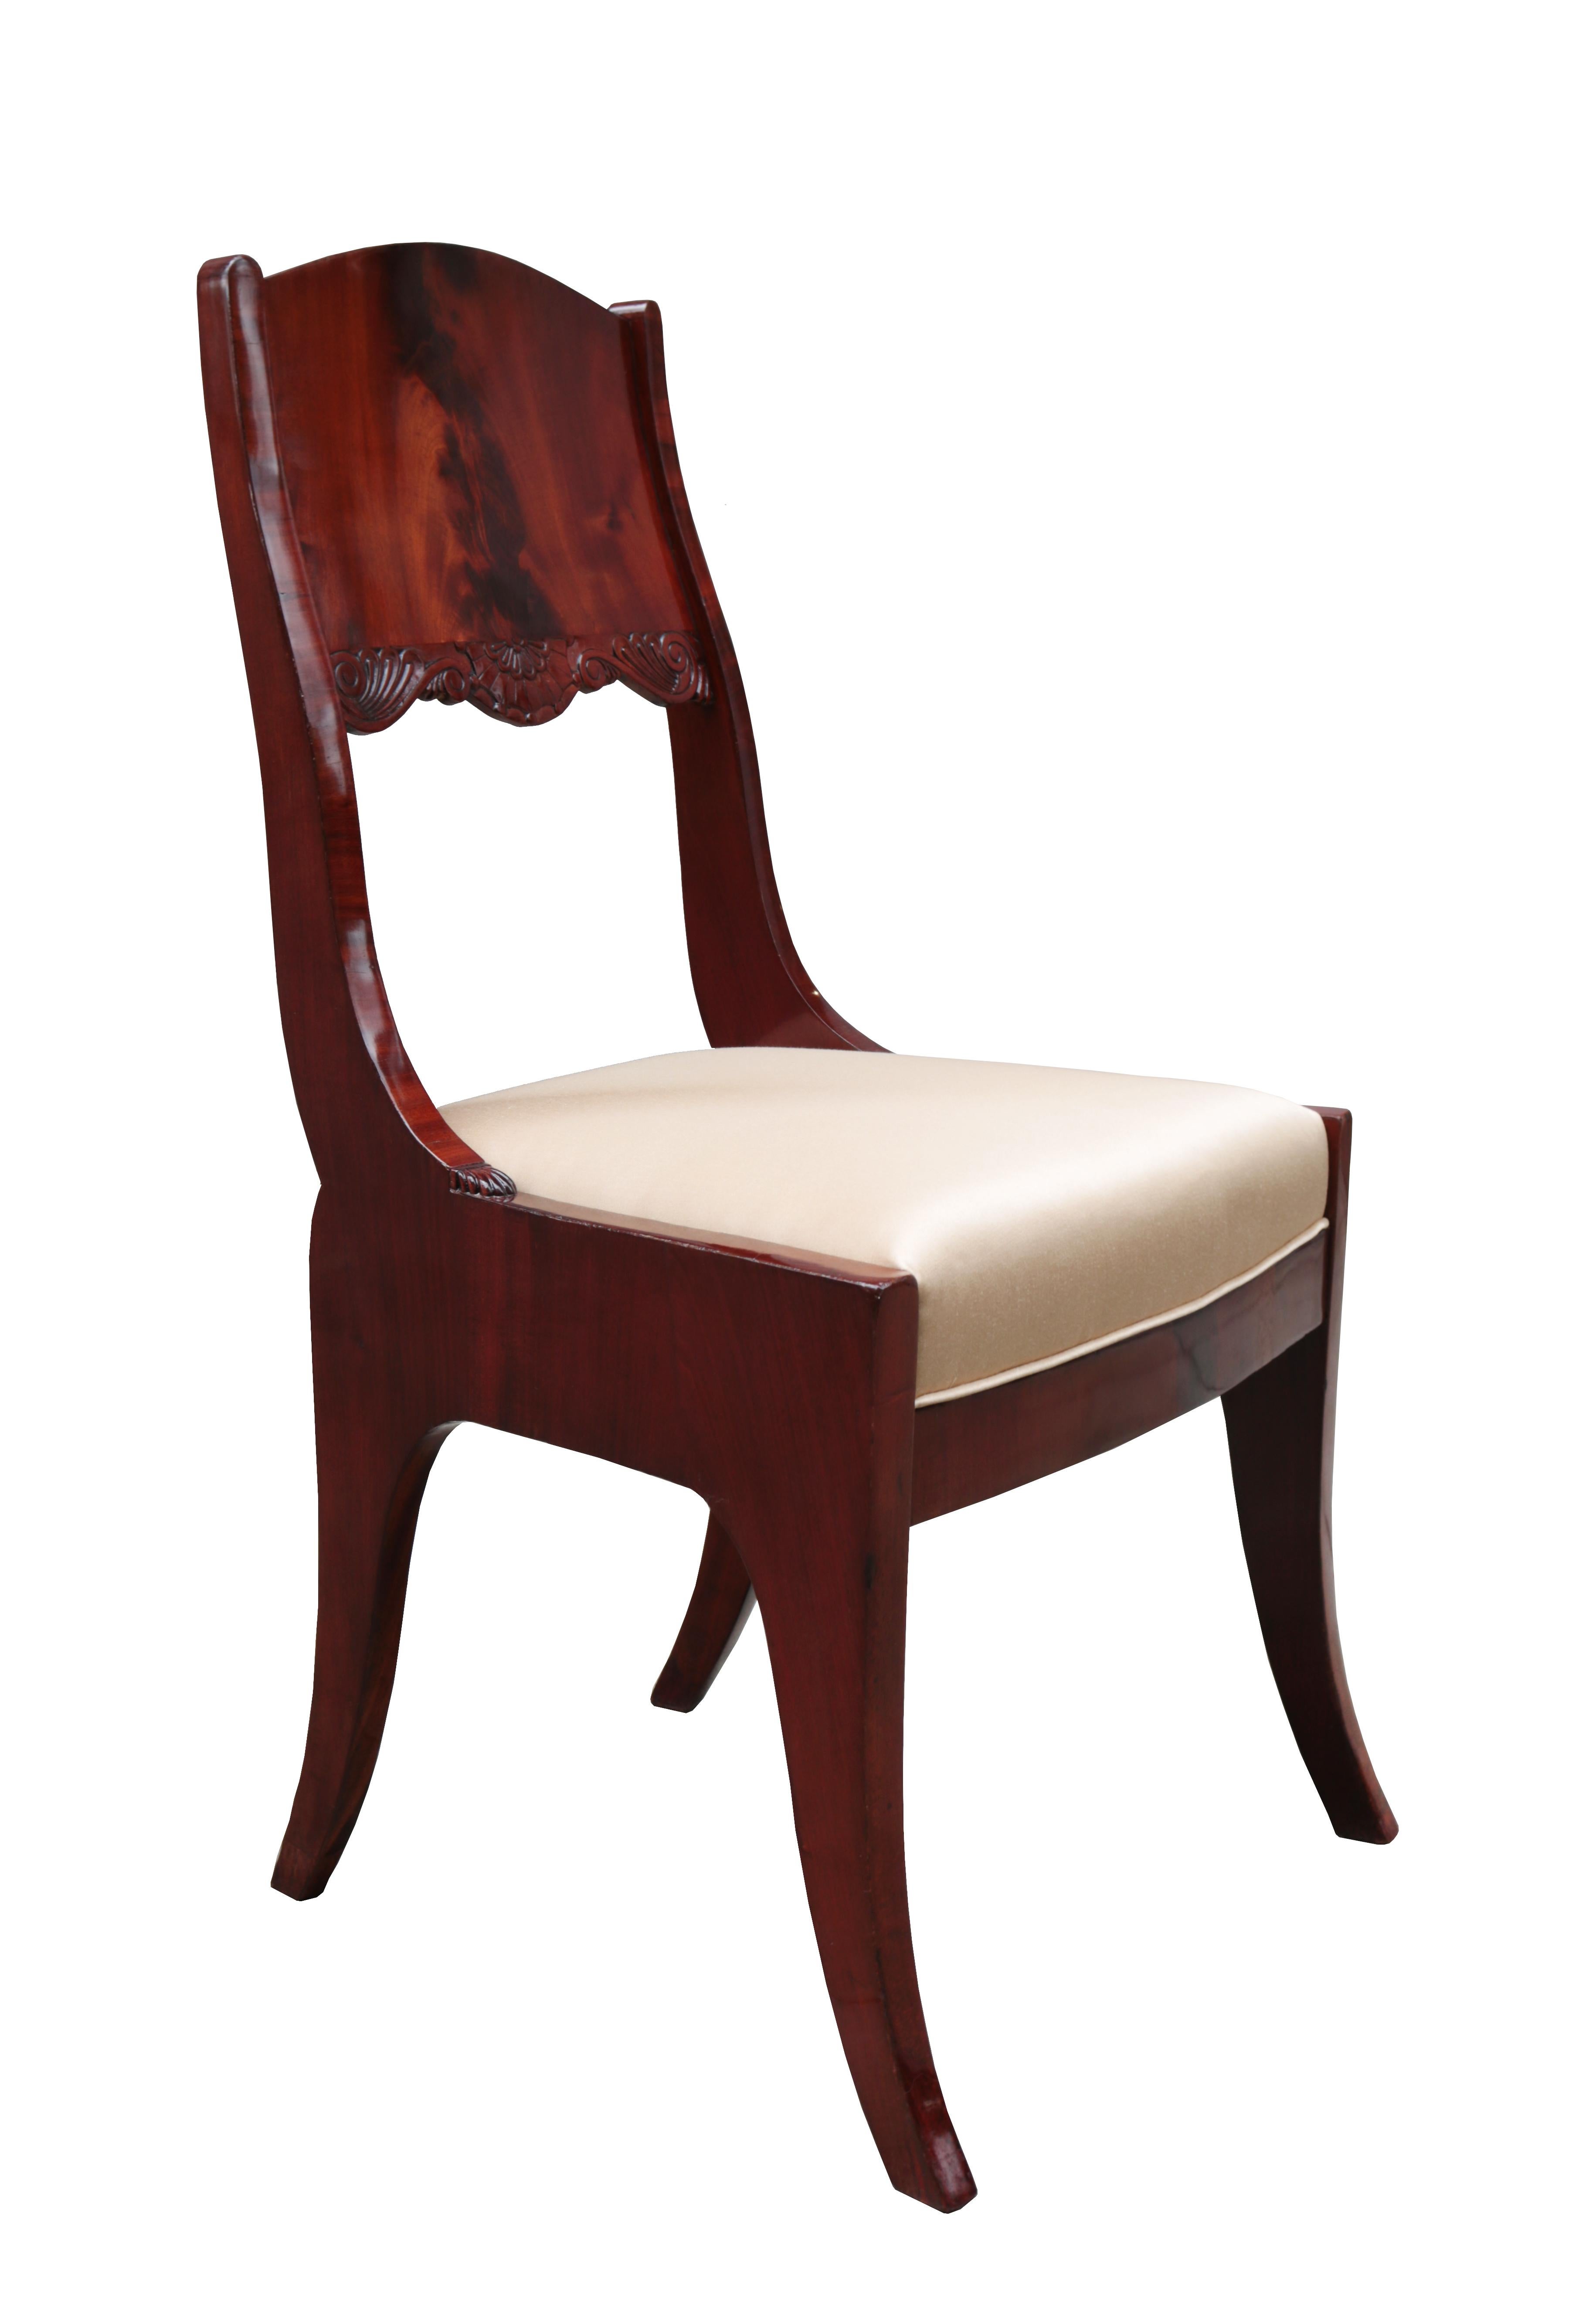 Pair of neoclassical side chairs.
Mahogany with carved details.